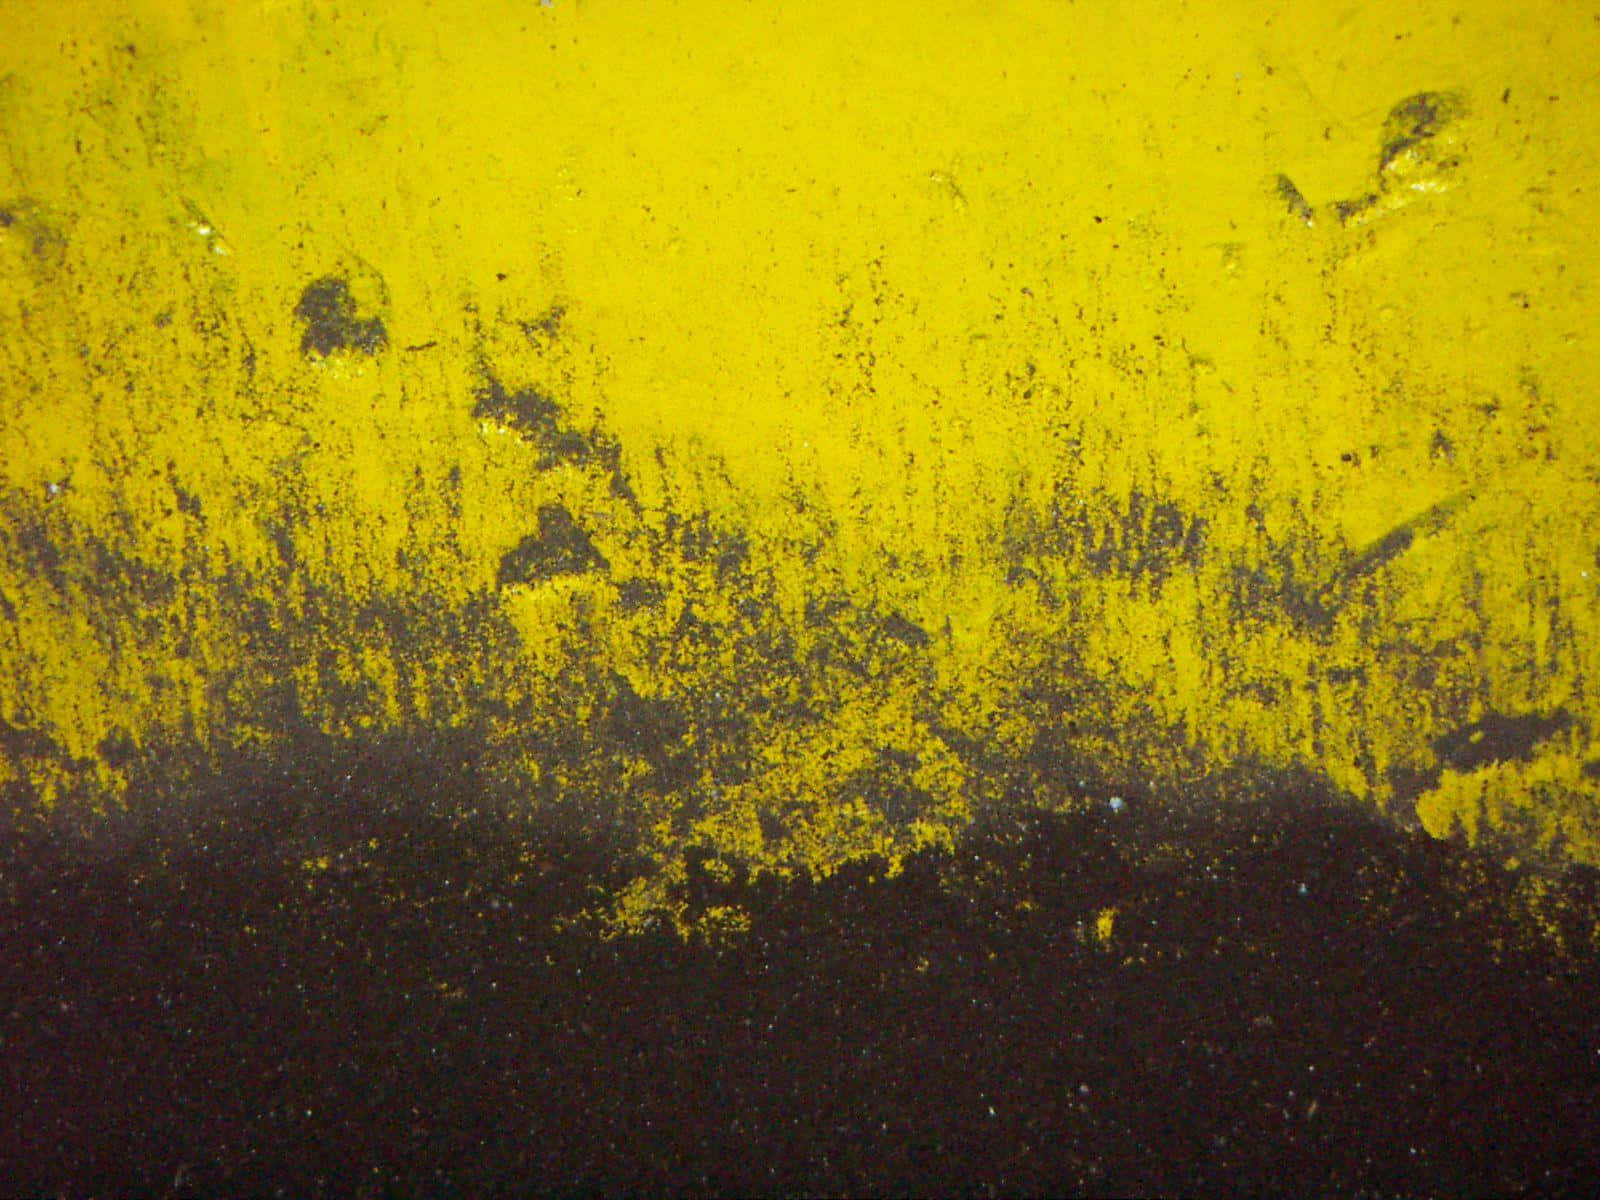 Shades of black and yellow create an electrifying background